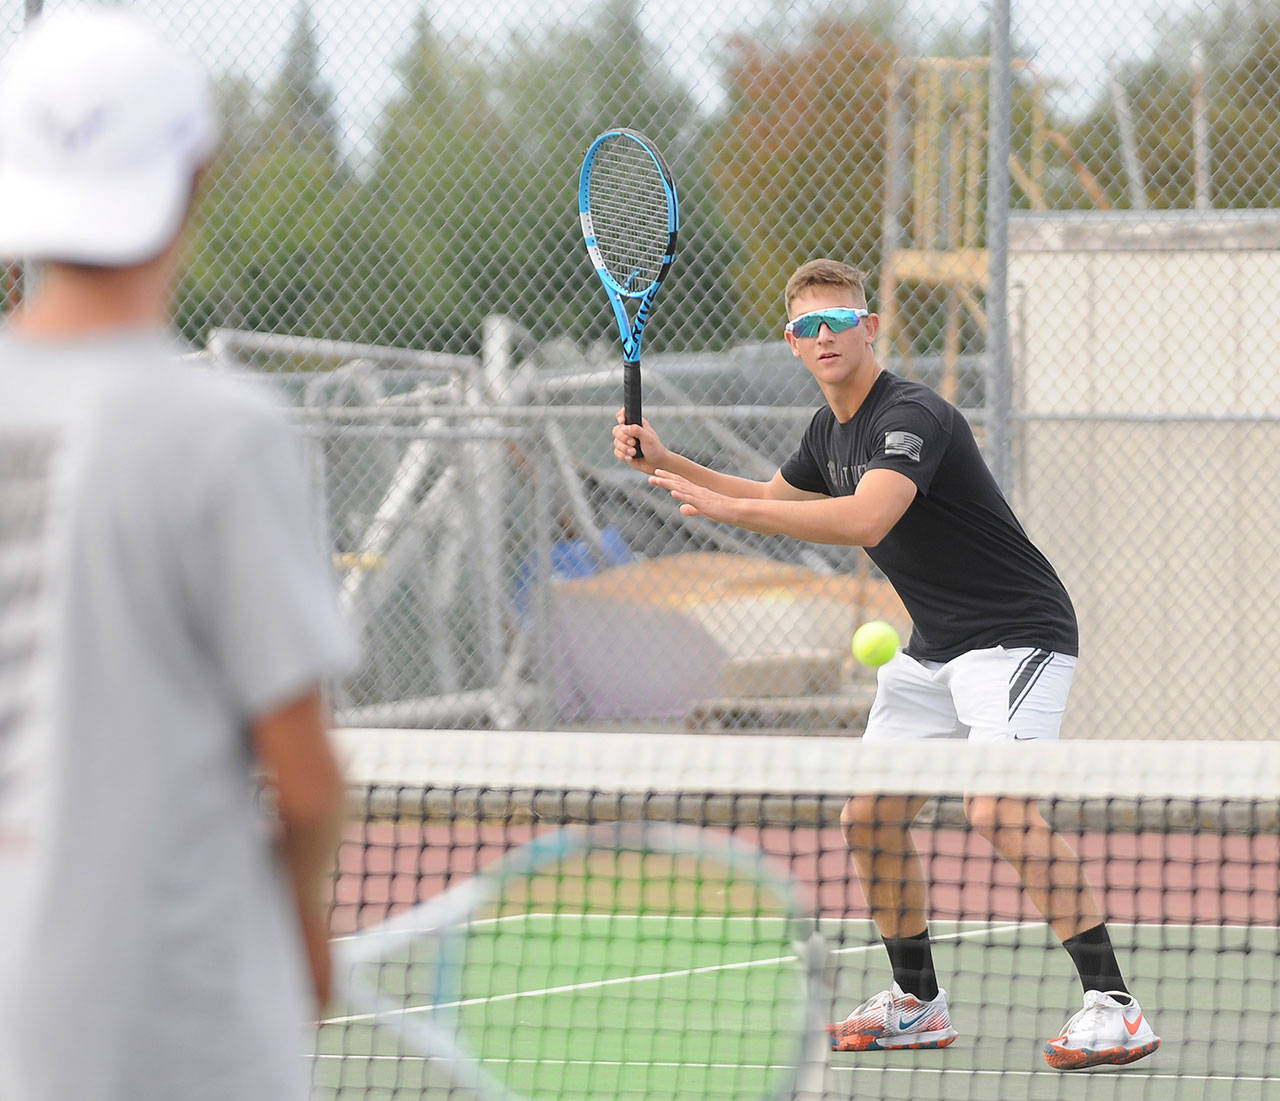 Sequim’s Connor Bear looks to hit a forehand shot in a 2021 preseason practice. He was 5-3 in singles play in 2020-21. Sequim Gazette photos by Michael Dashiell